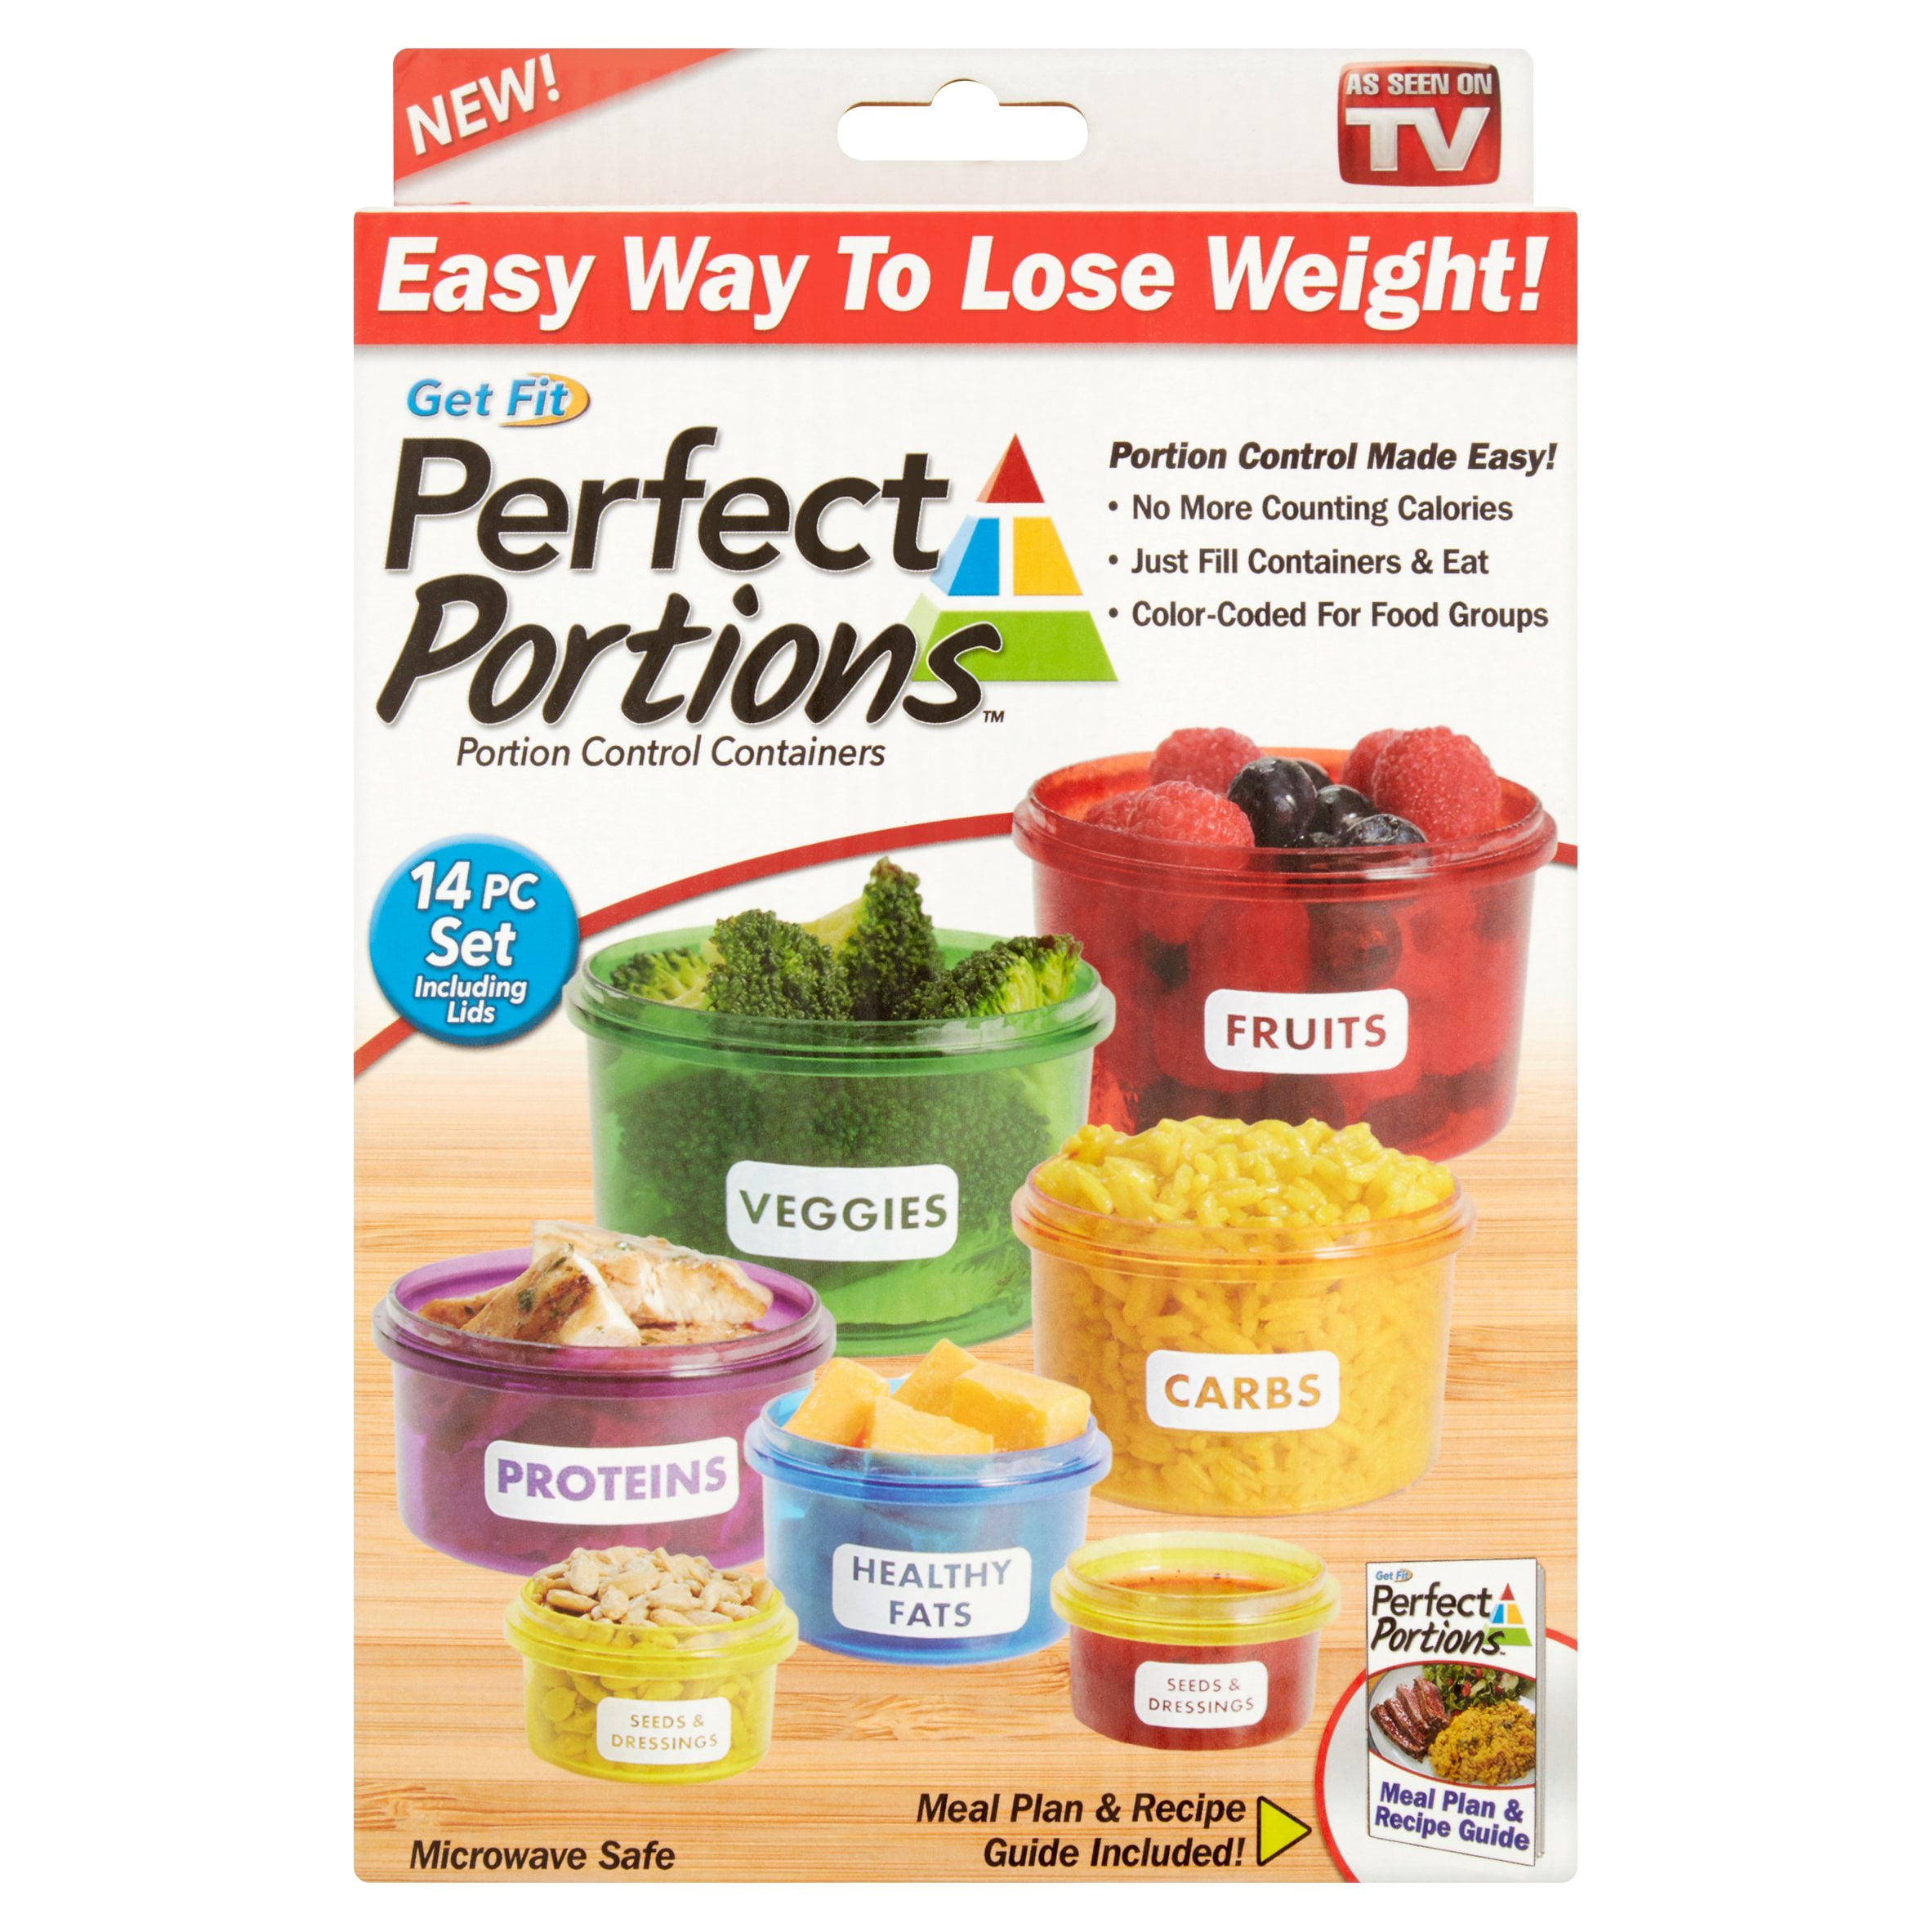 21 Day Fix Diet Food Containers Kit Portion Control Storage Box Plan Weight Loss 